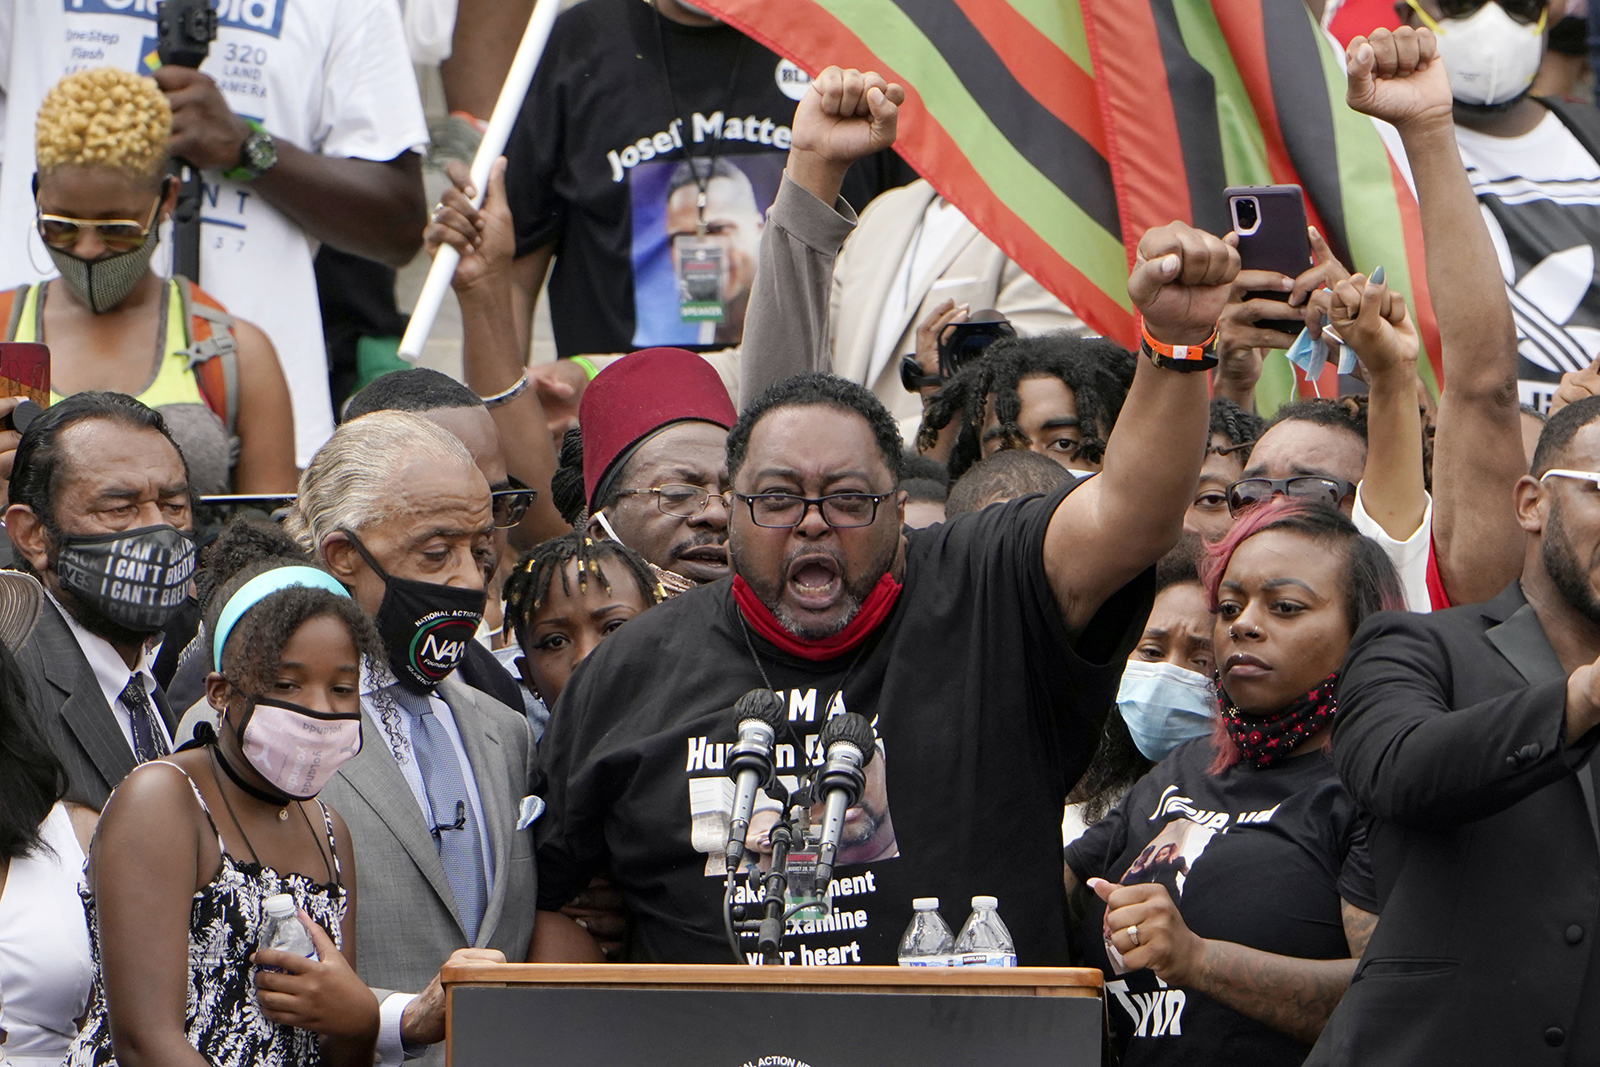 Jacob Blake Sr., father of Jacob Blake, raises his fist in the air while speaking at the March on Washington, on Friday August 28, at the Lincoln Memorial in Washington.